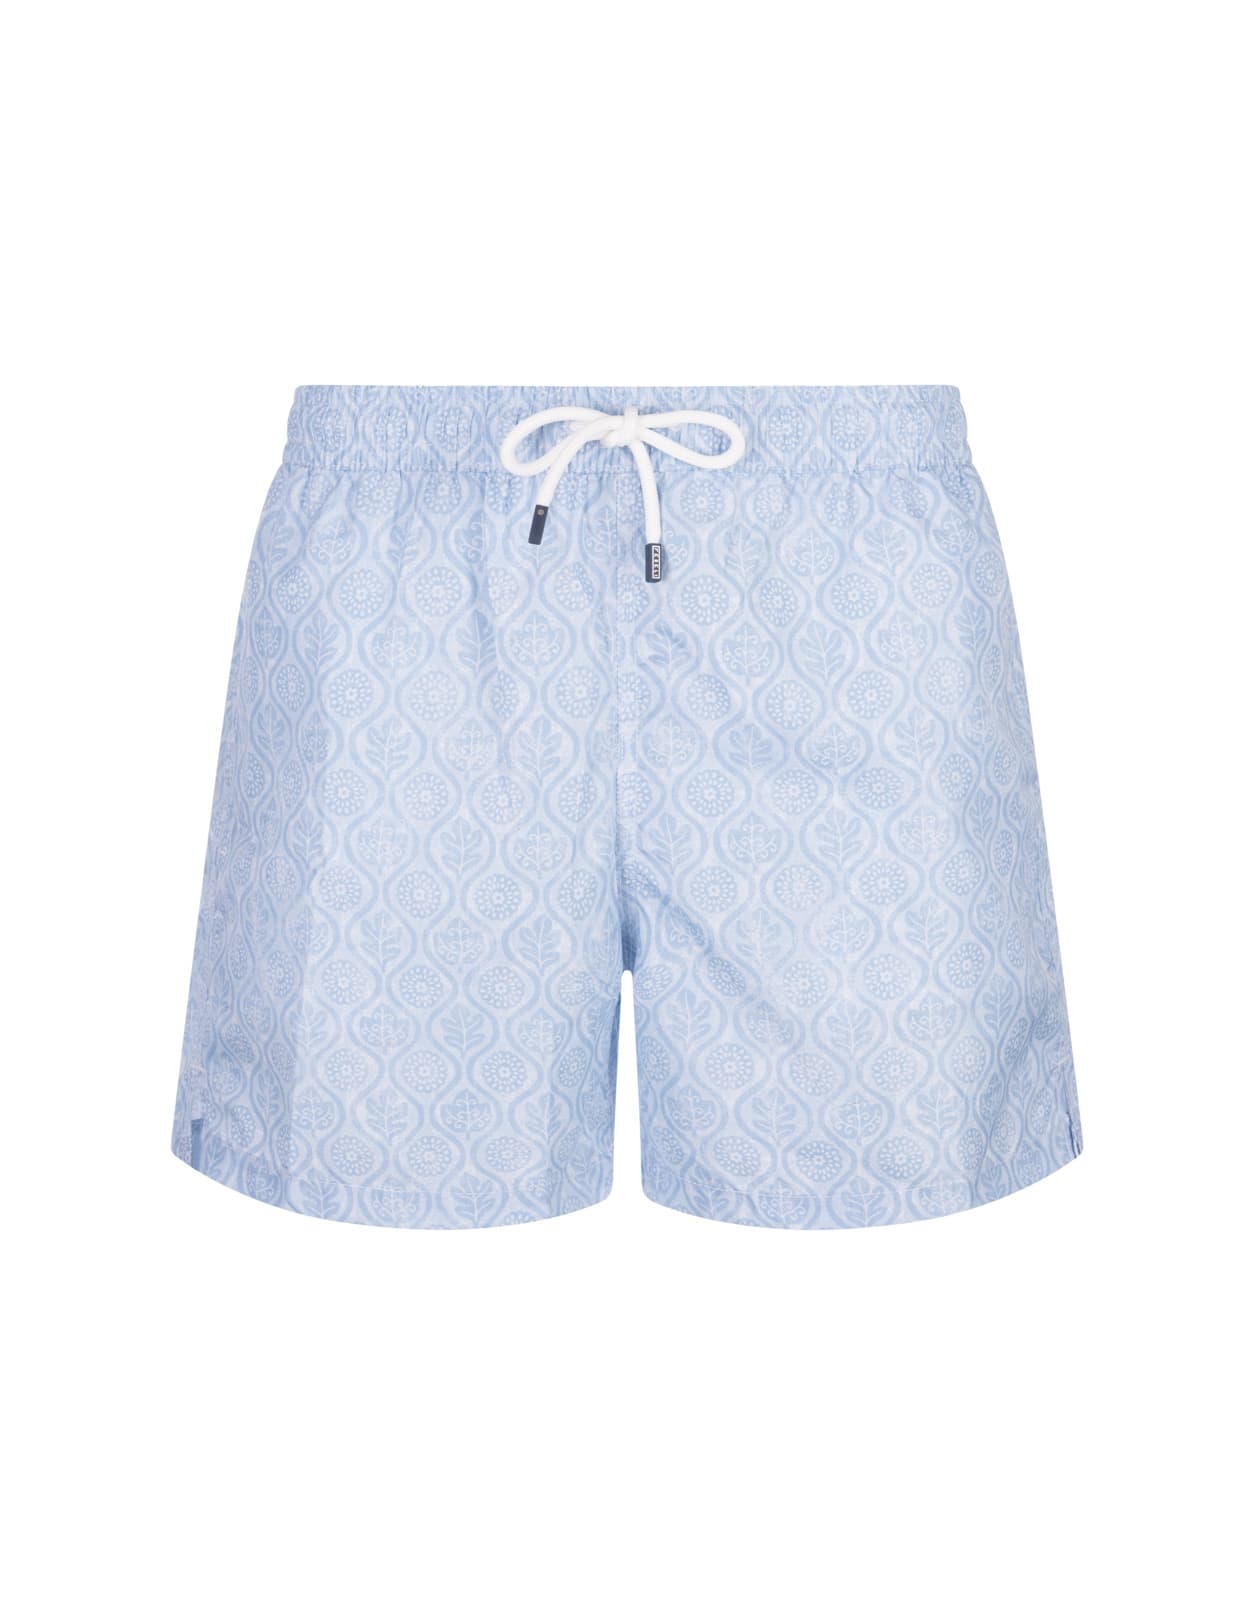 Fedeli Light Blue Swim Shorts With Flower And Leaf Pattern